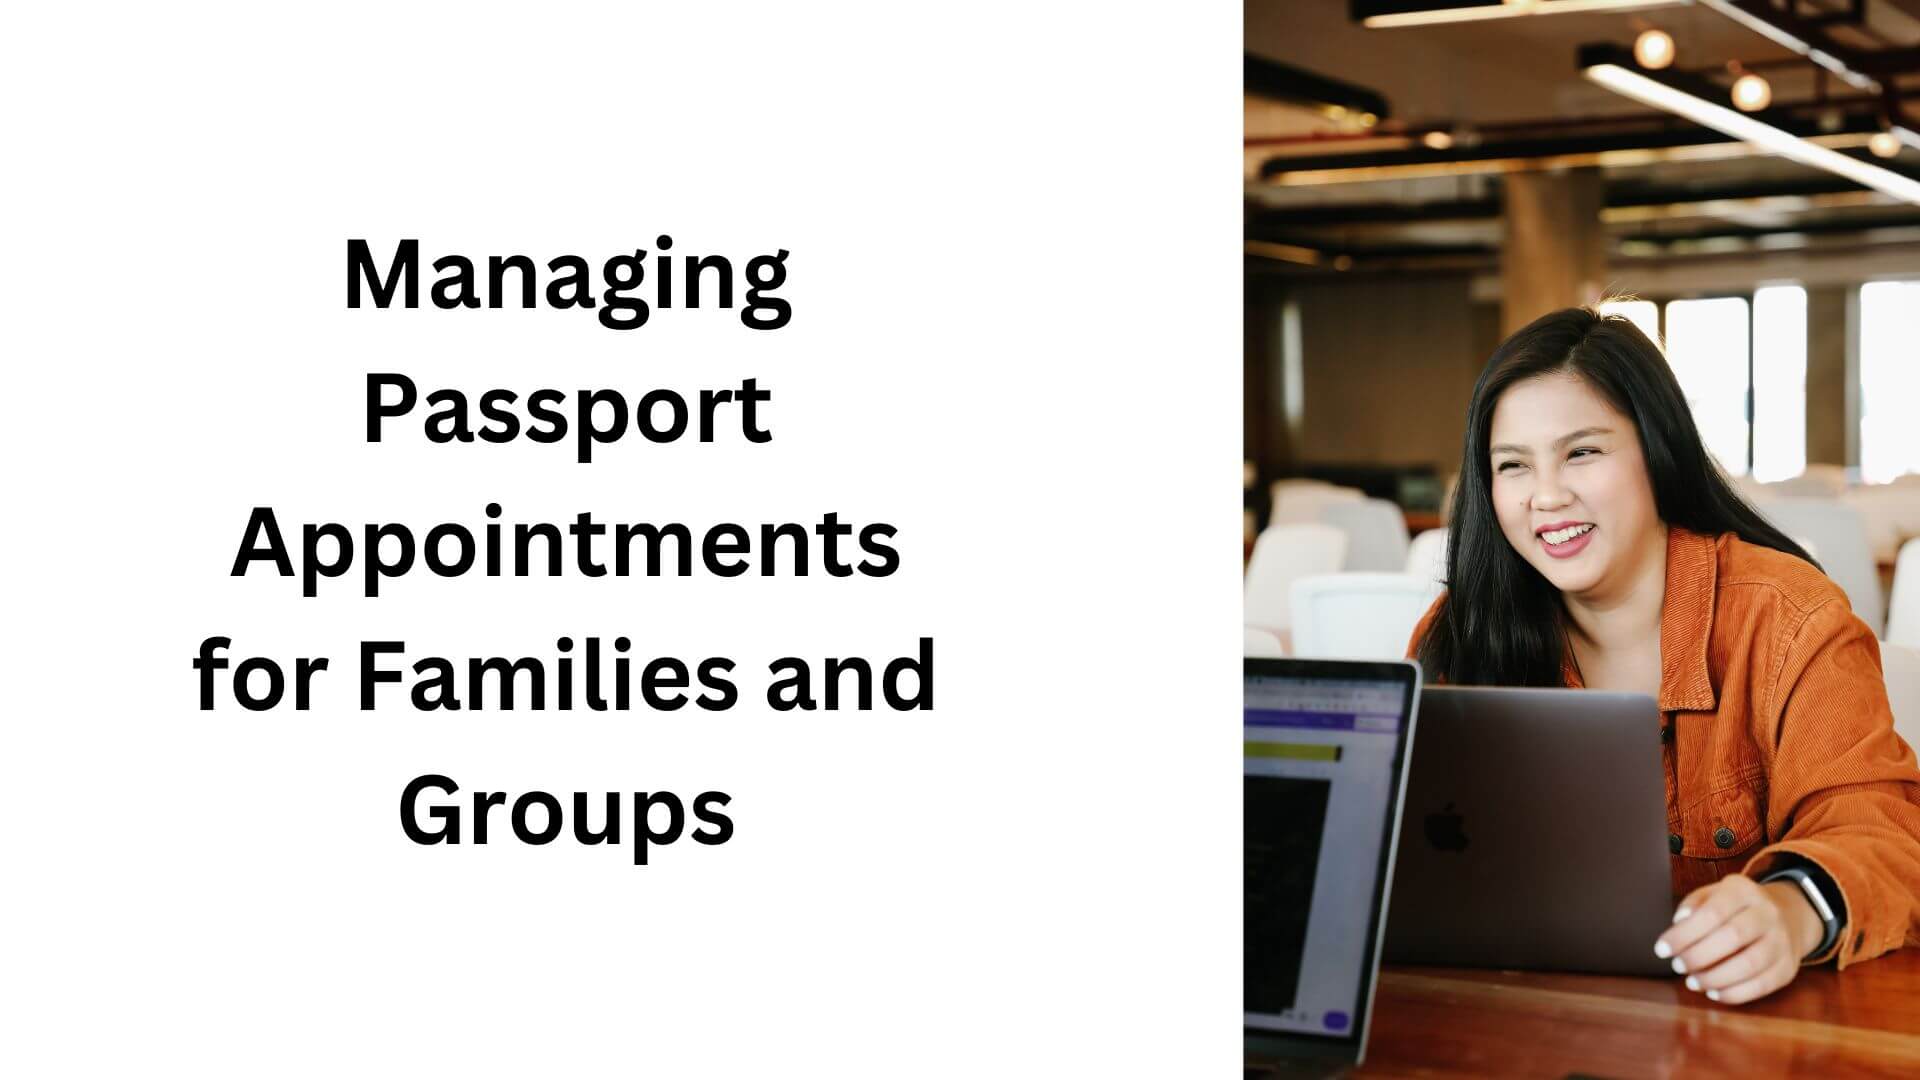 Managing Passport Appointments for Families and Groups